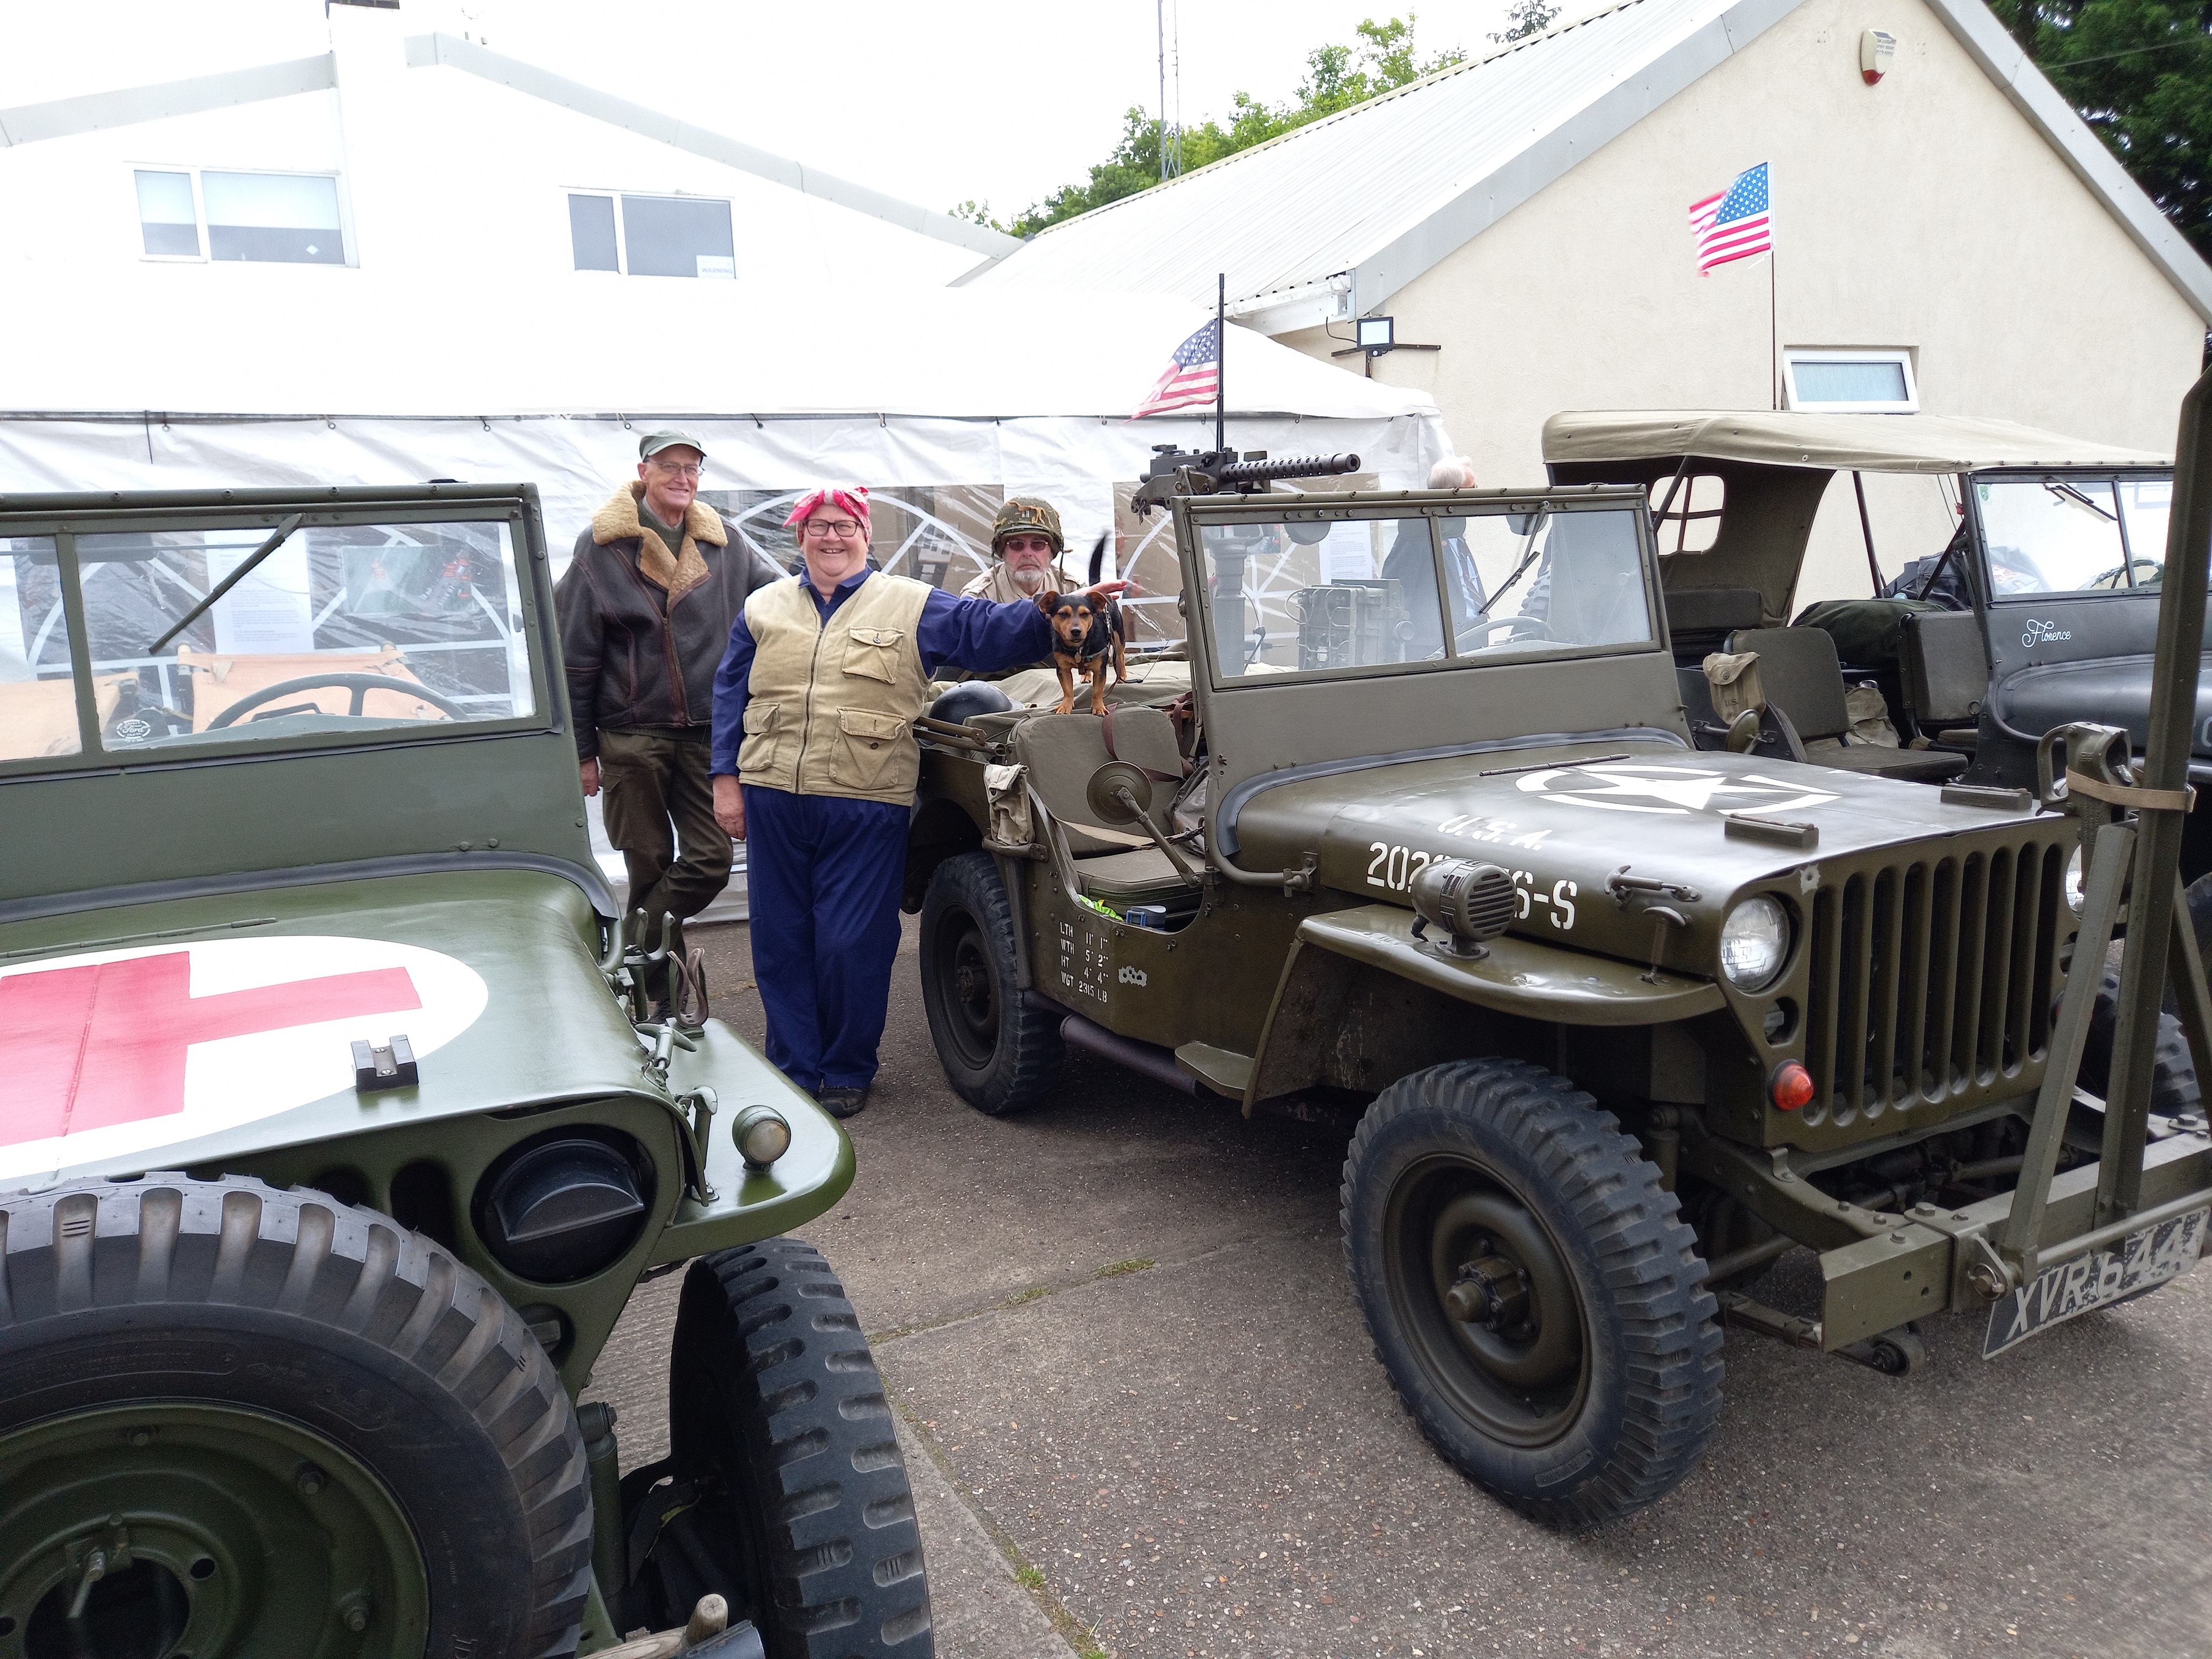 American military jeeps join the Saltby line-up